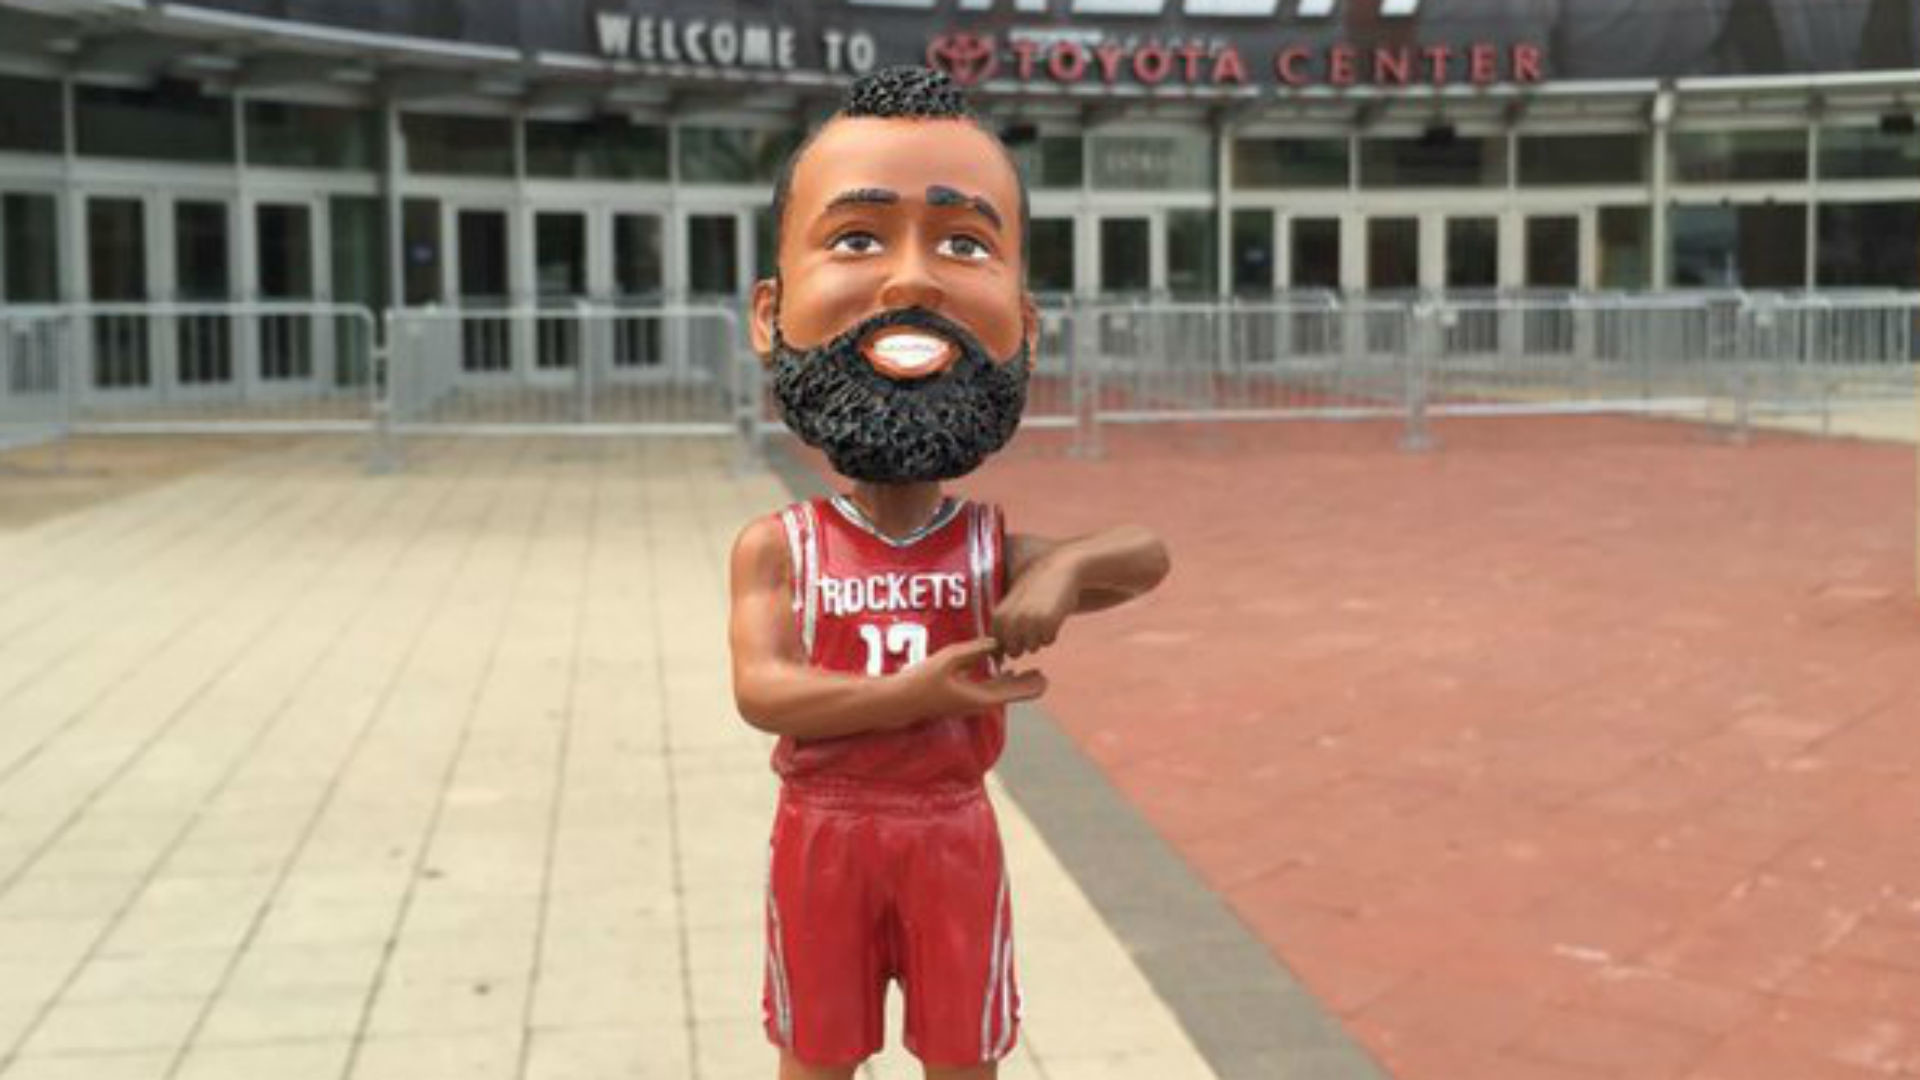 1920x1080 ... James harden will be cursed forever but at least he has a cool ...